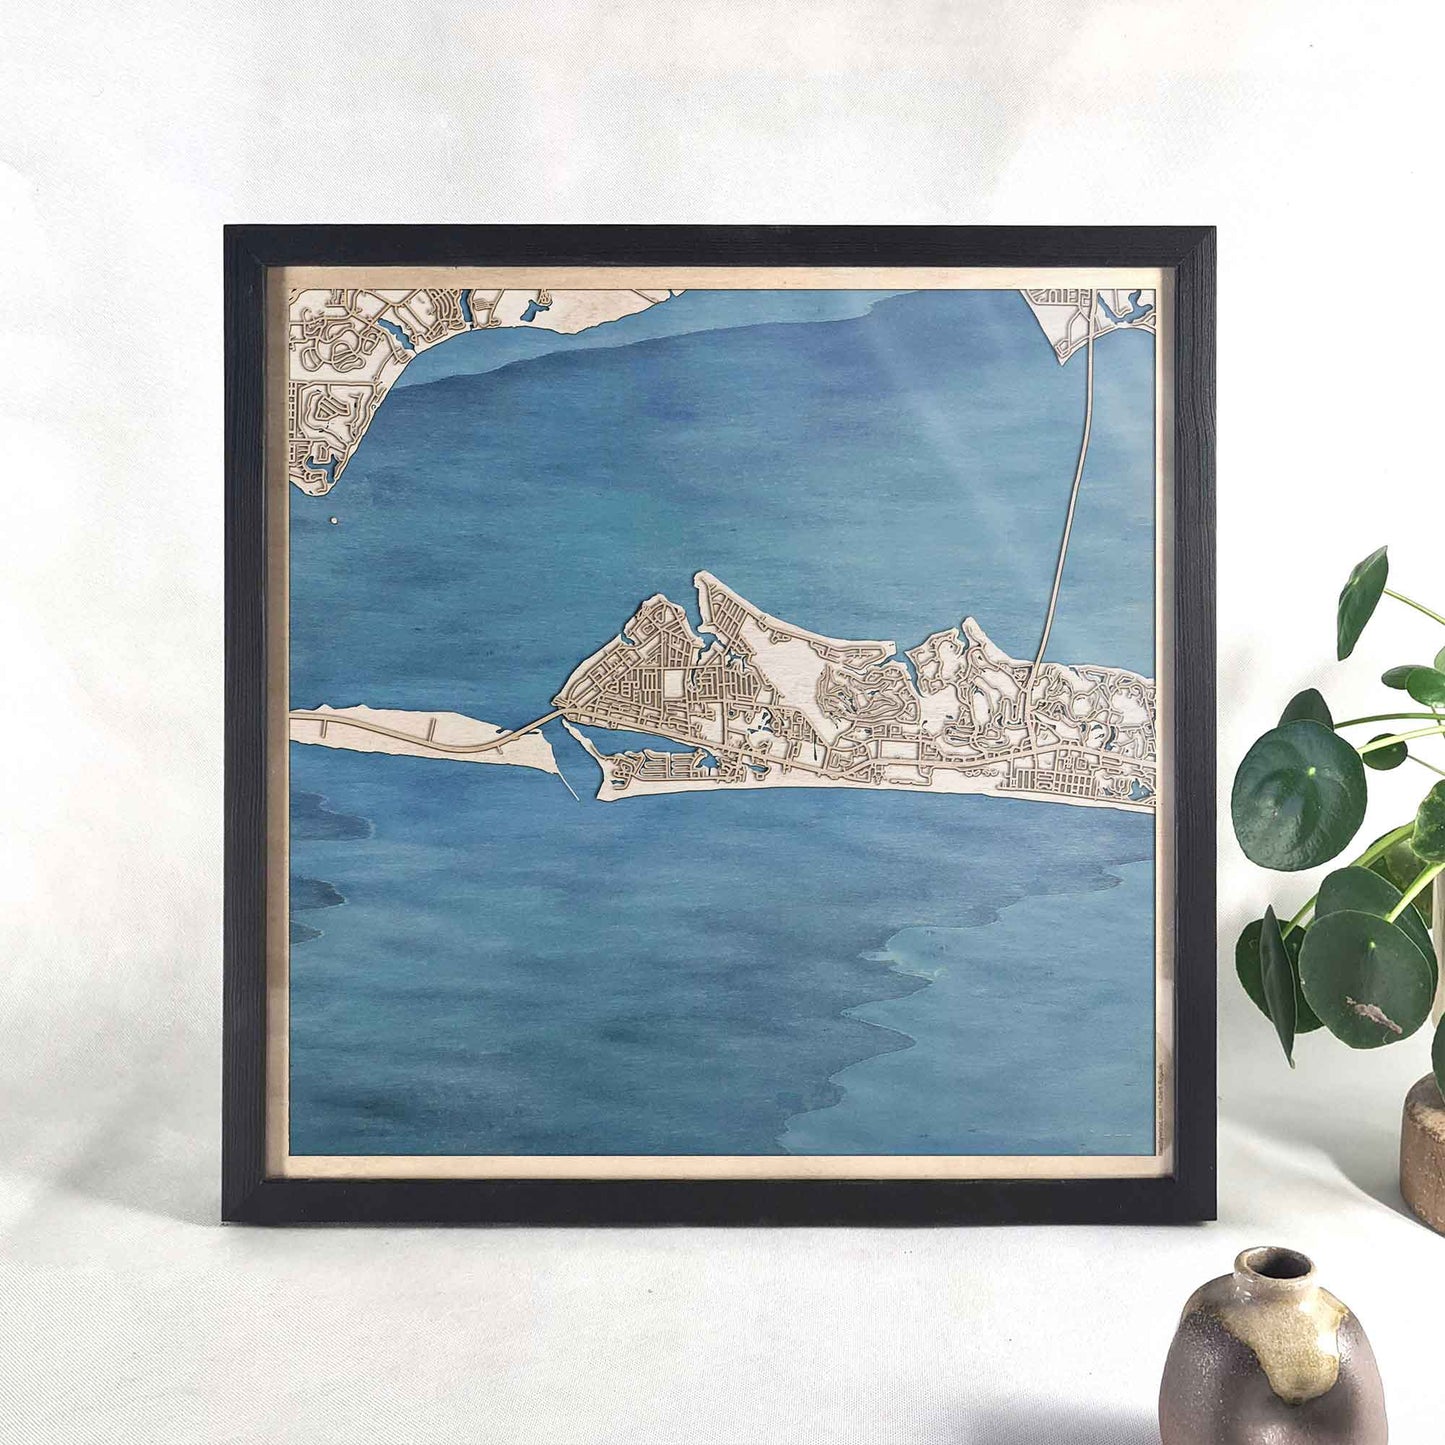 Destin Wooden Map by CityWood - Custom Wood Map Art - Unique Laser Cut Engraved - Anniversary Gift